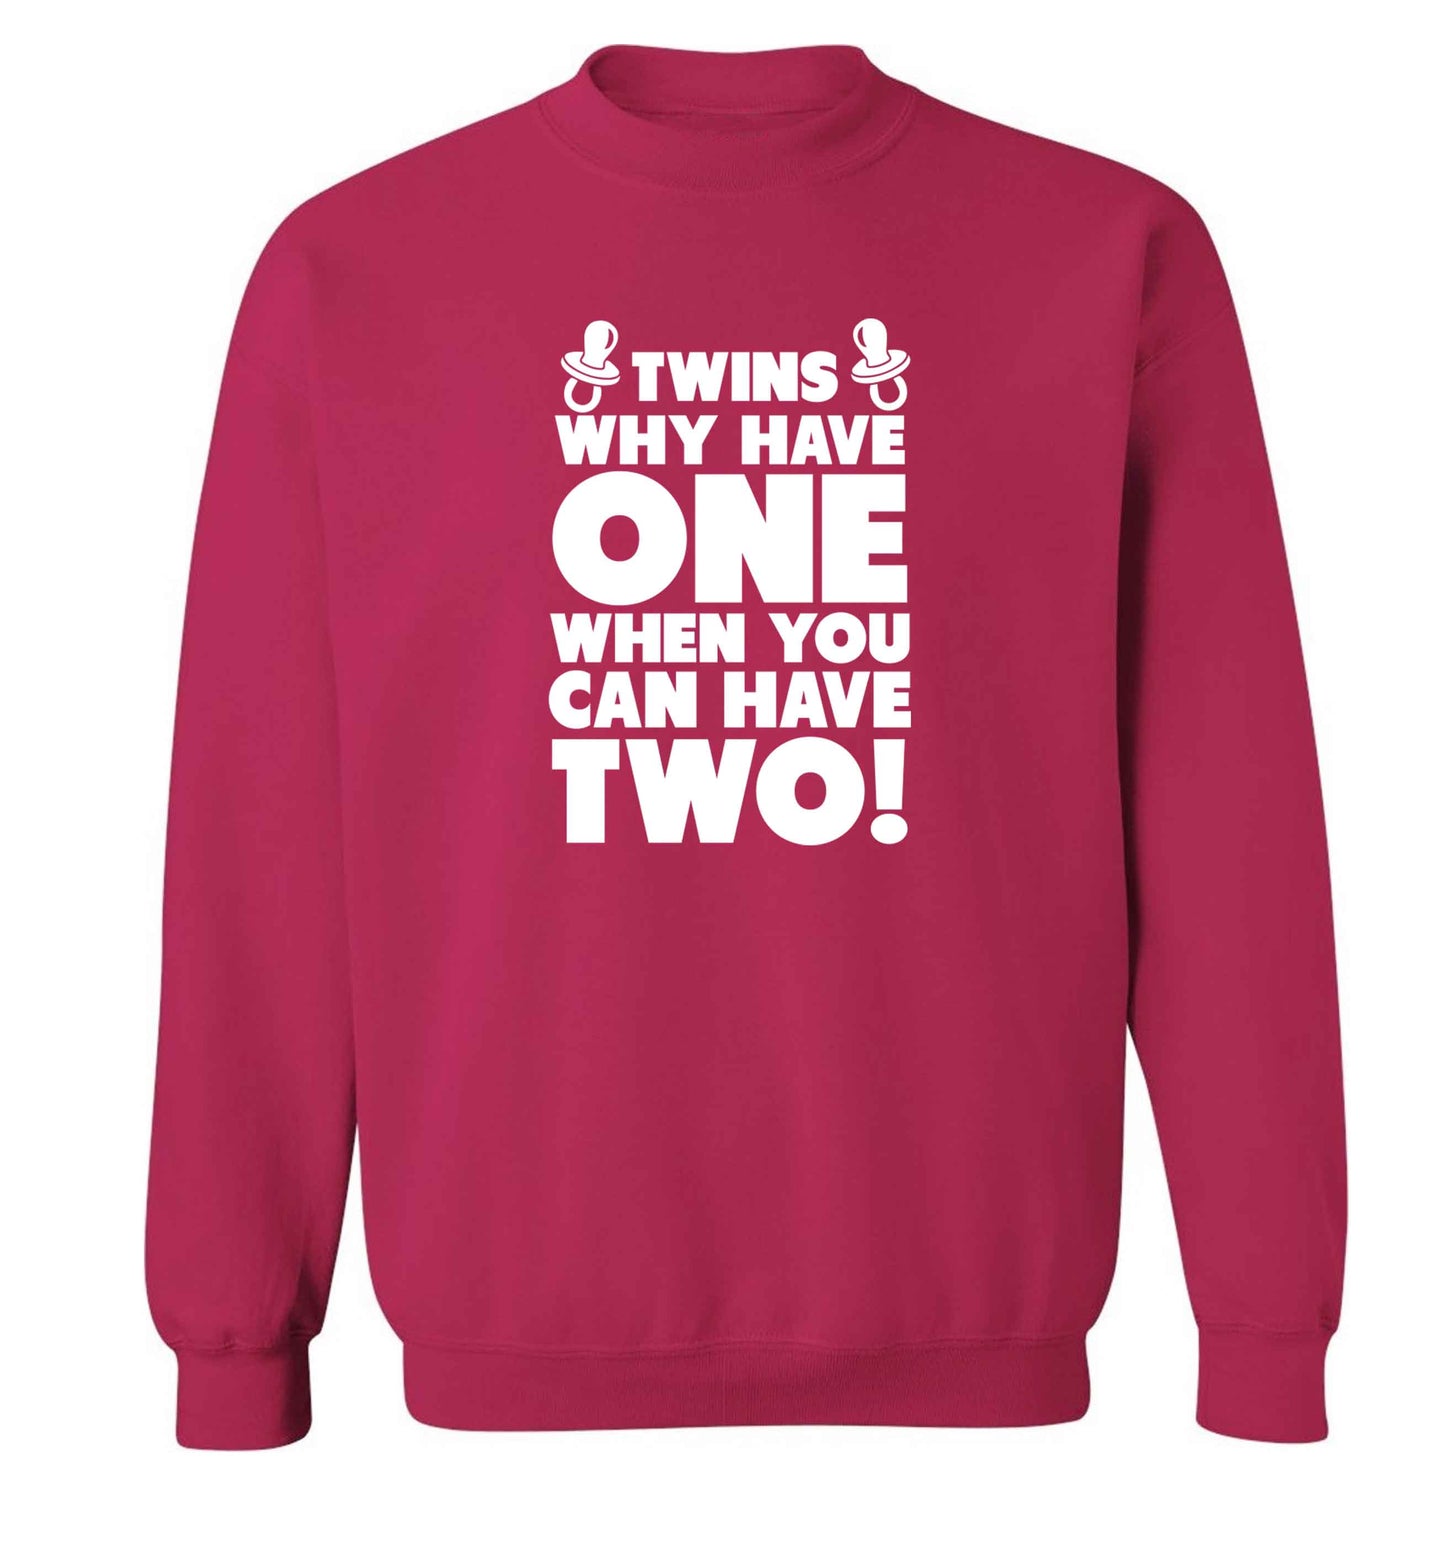 Twins why have one when you can have two adult's unisex pink sweater 2XL